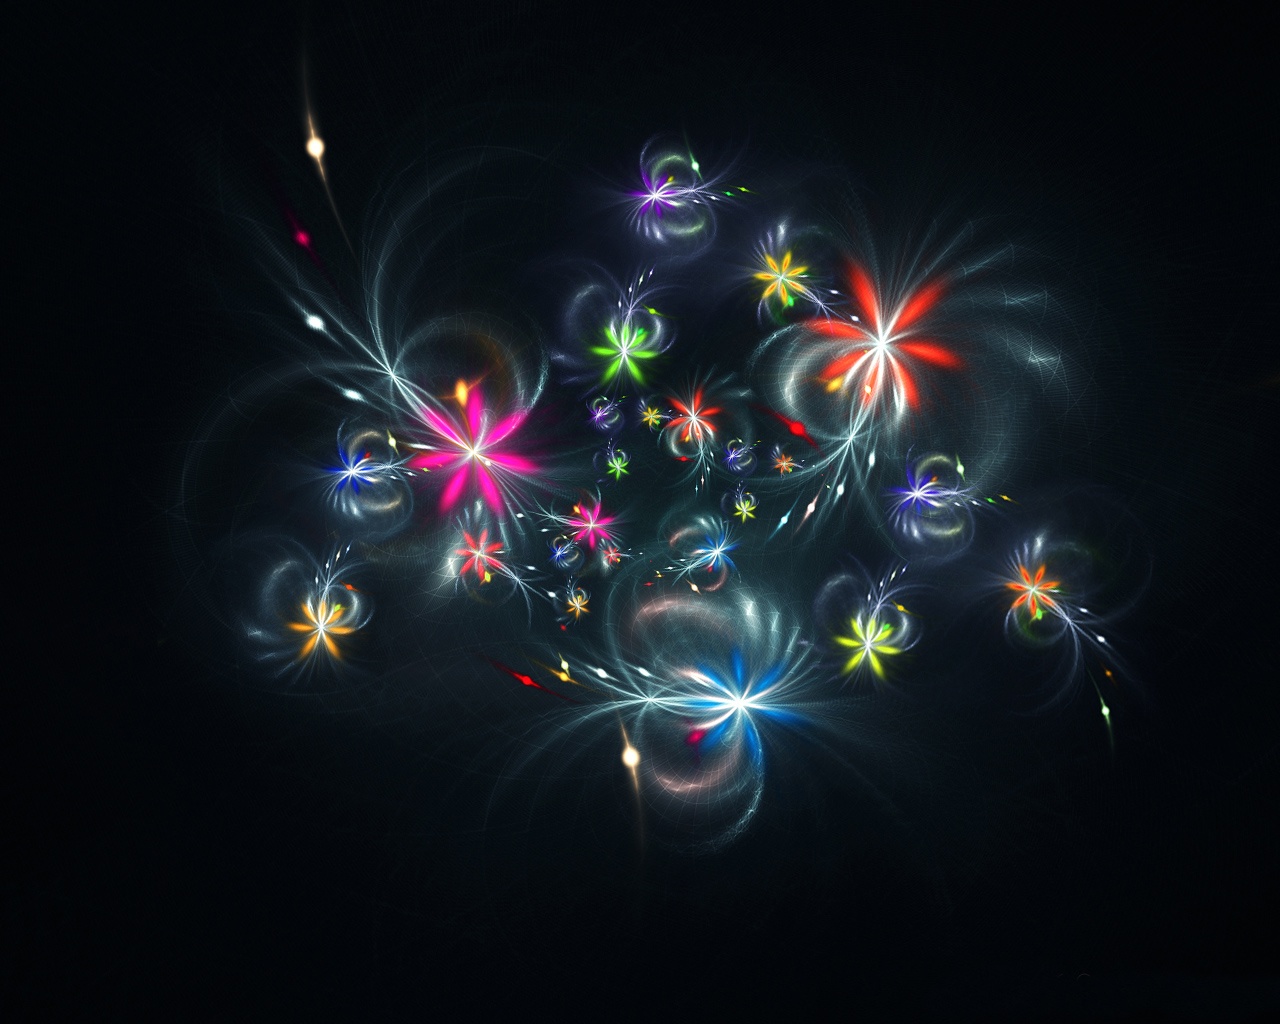 Lights With Led Is Wallpaper Picswallpaper